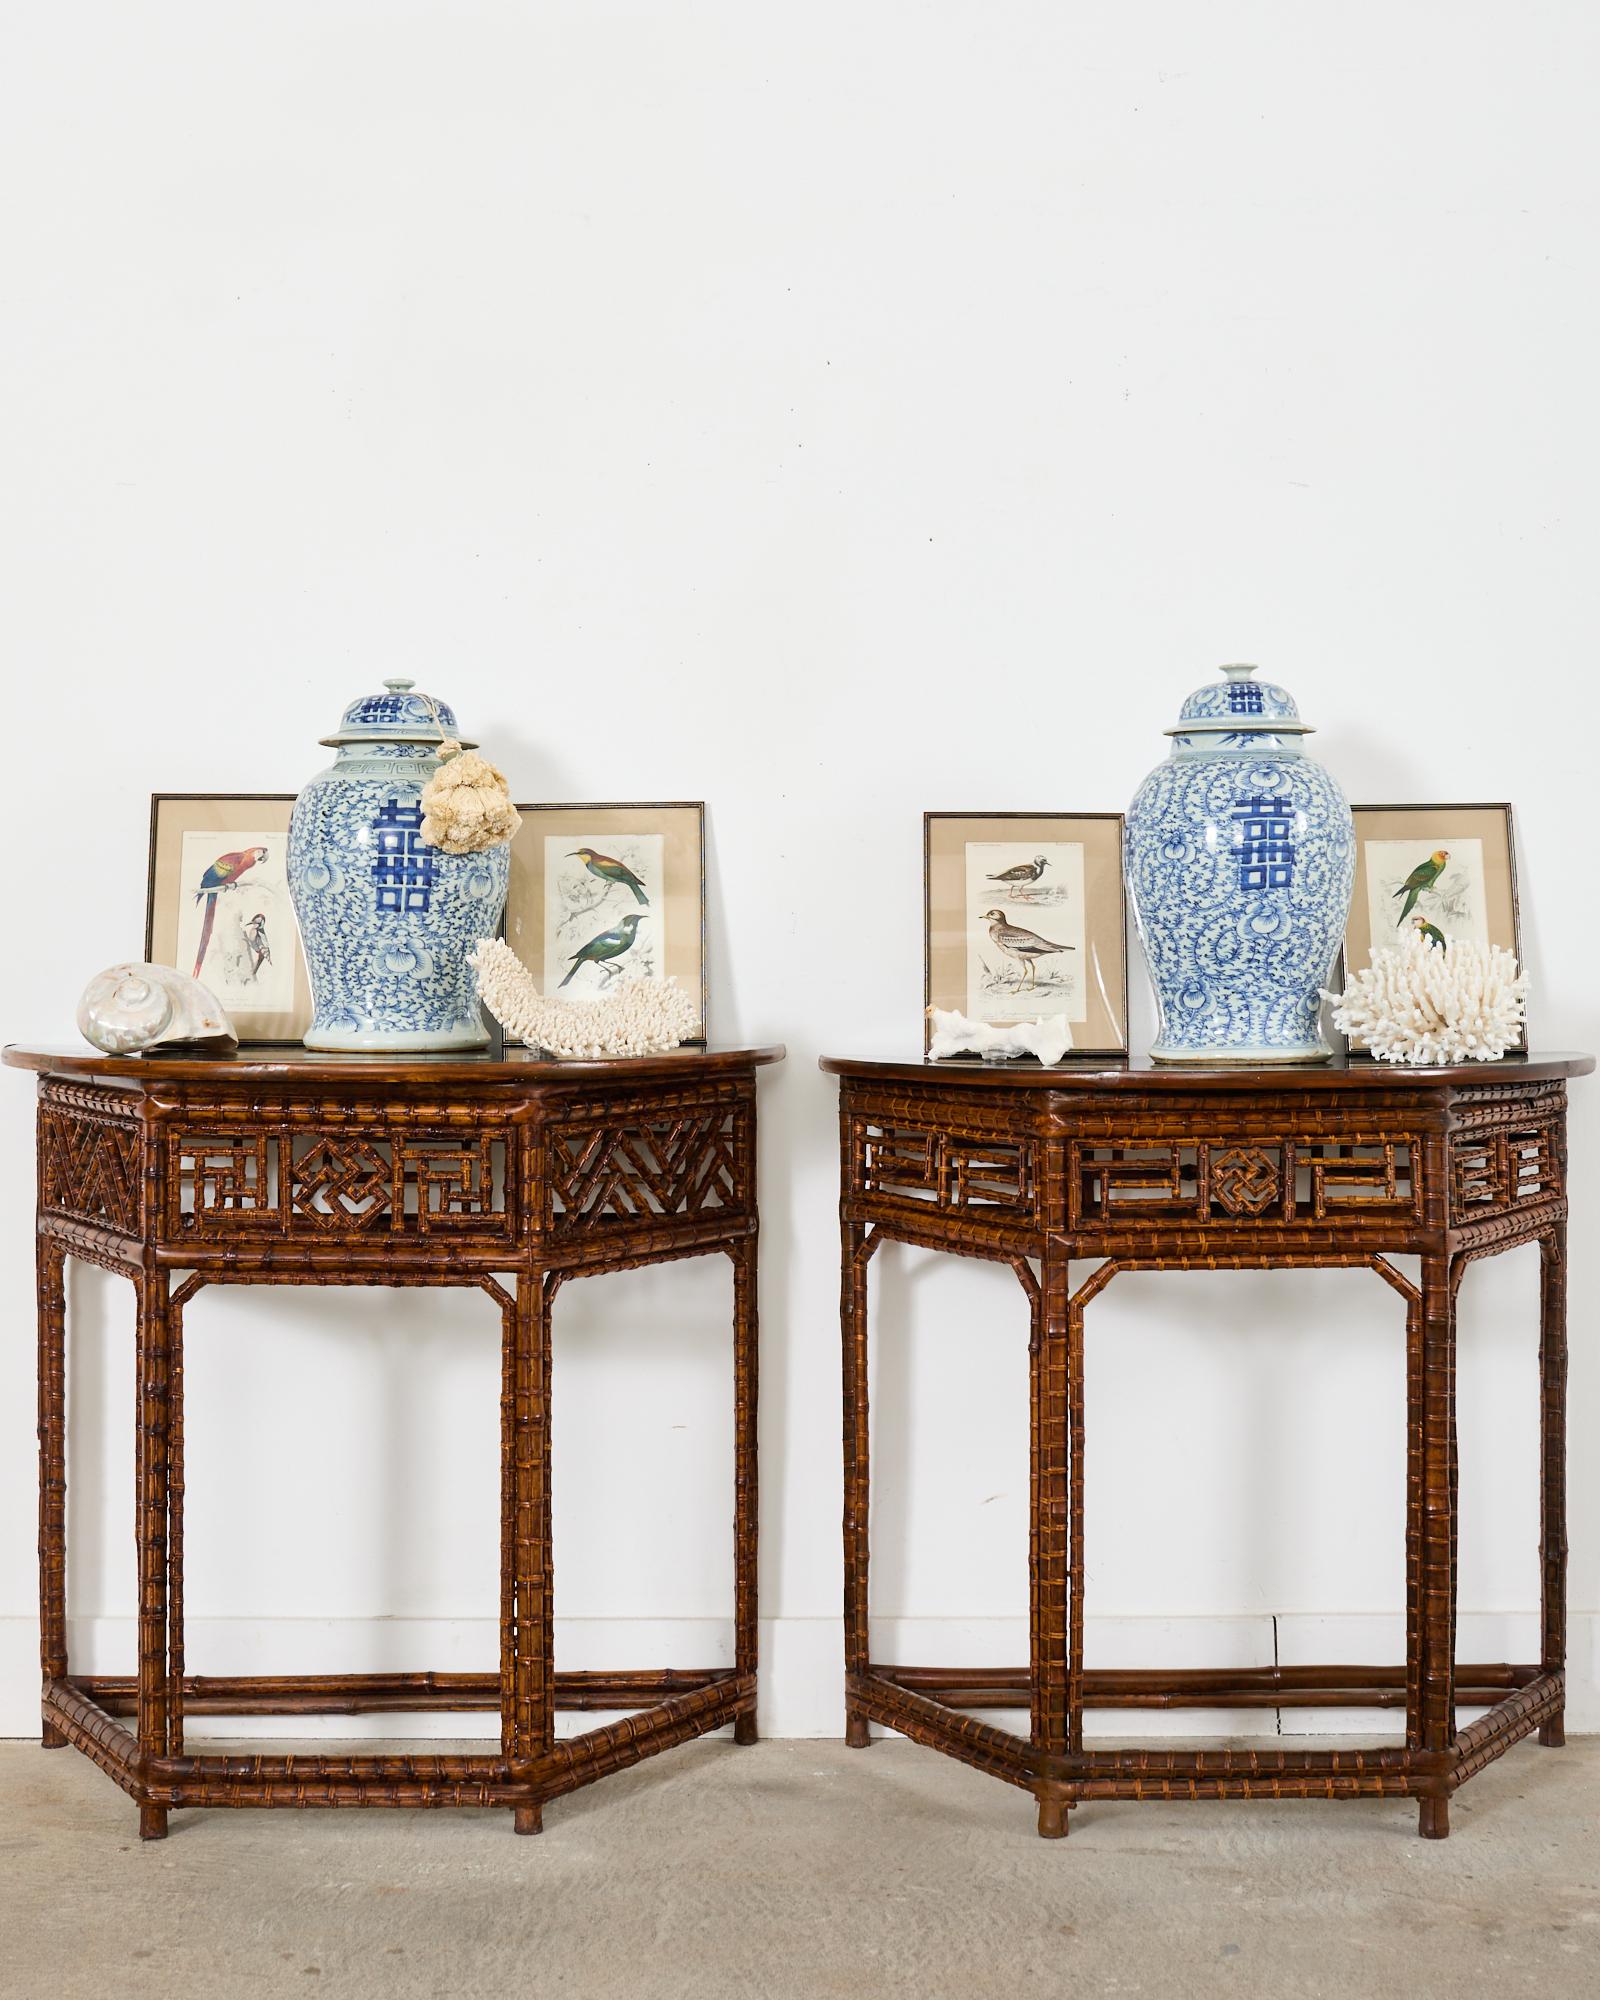 Dramatic pair of bamboo demi-lune console tables made in the Chinese Chippendale style. The tables feature intricate open fretwork designs that slightly vary on each table. Each table has a black ebonized lacquered top with a split bamboo edge. The